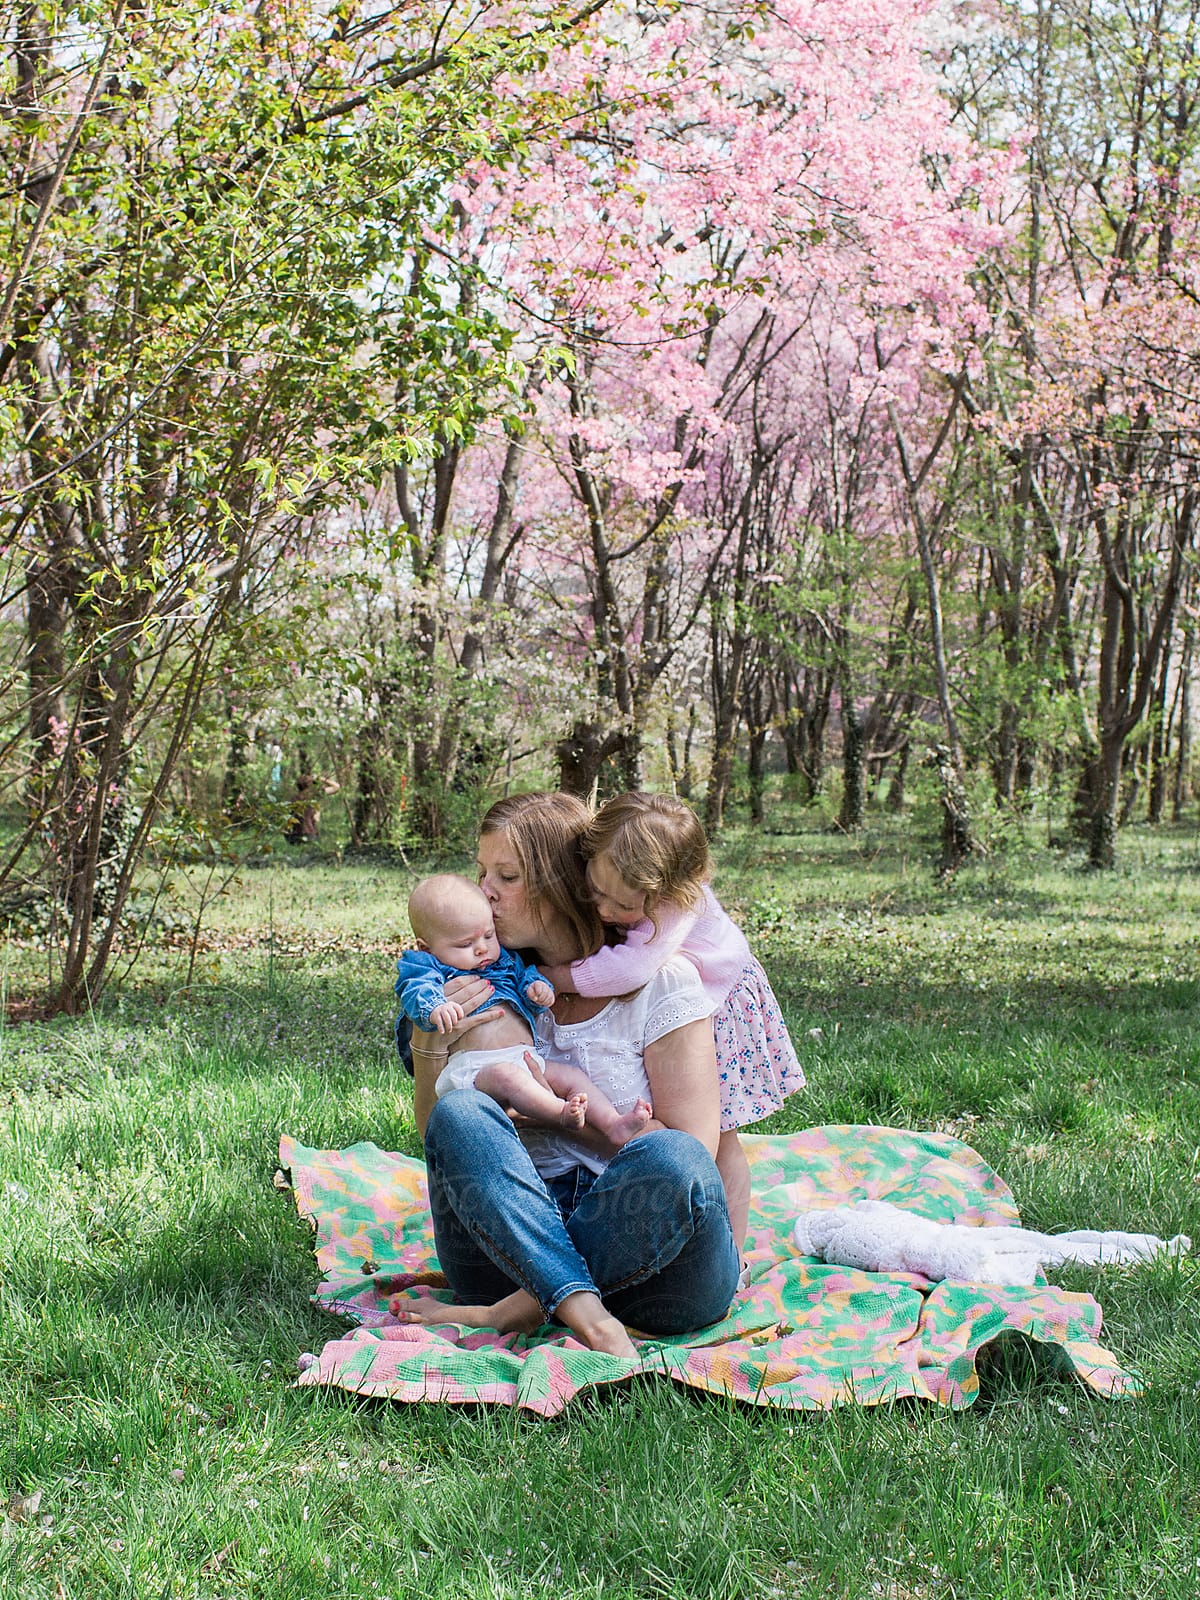 mother and children picnicking under spring blooms